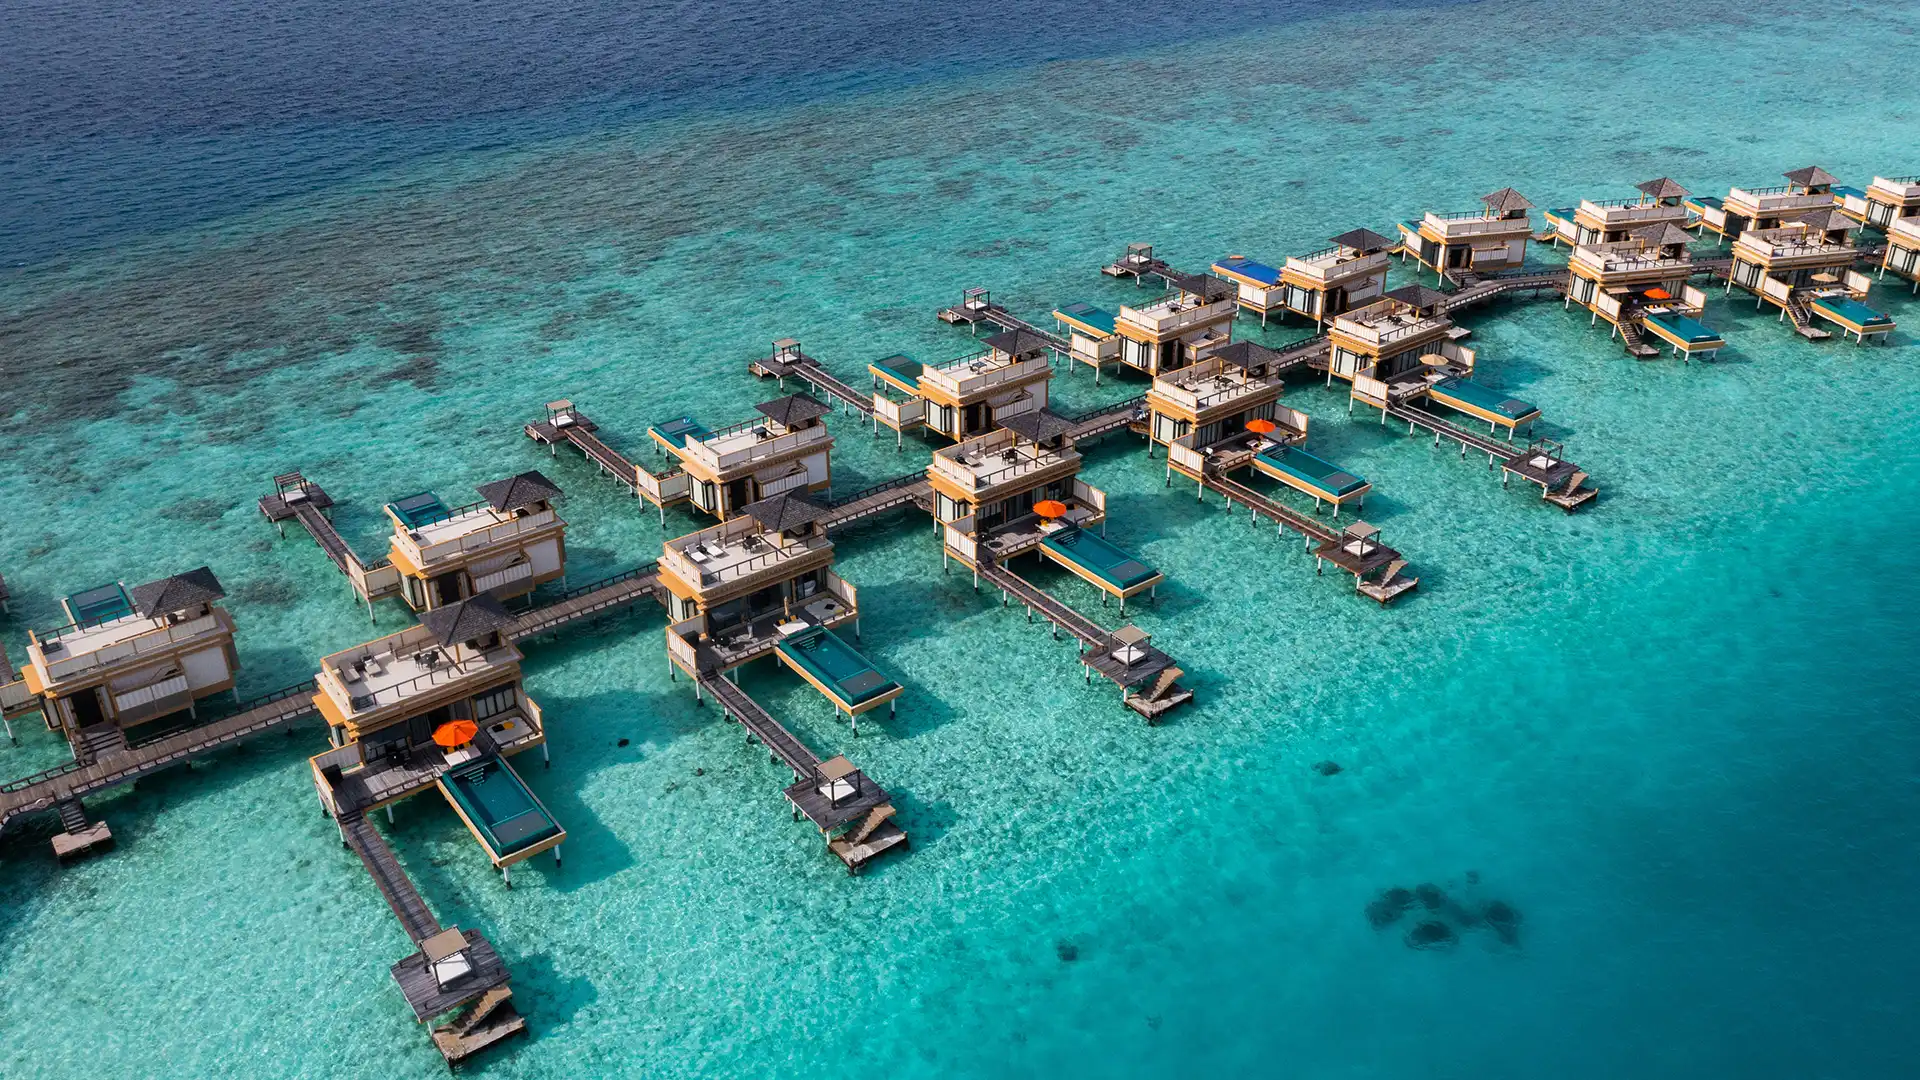 Inocean Pool Villas with plunge pools perched over the Maldivian waters at Angsana Velavaru.